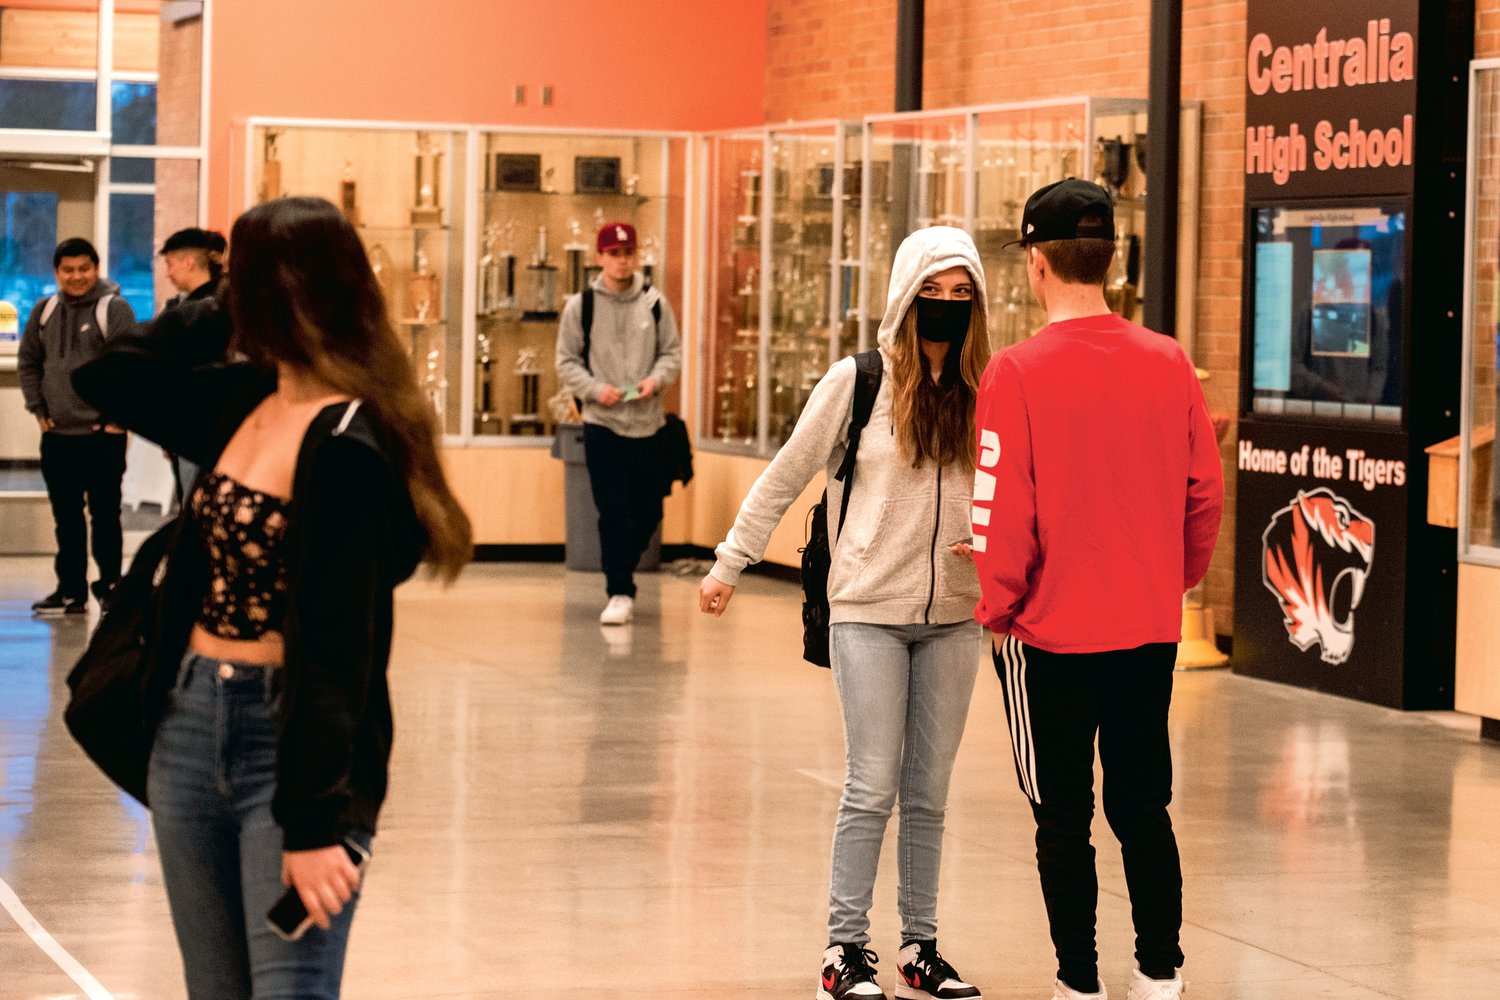 Students at Centralia High School mingle before class Tuesday morning.